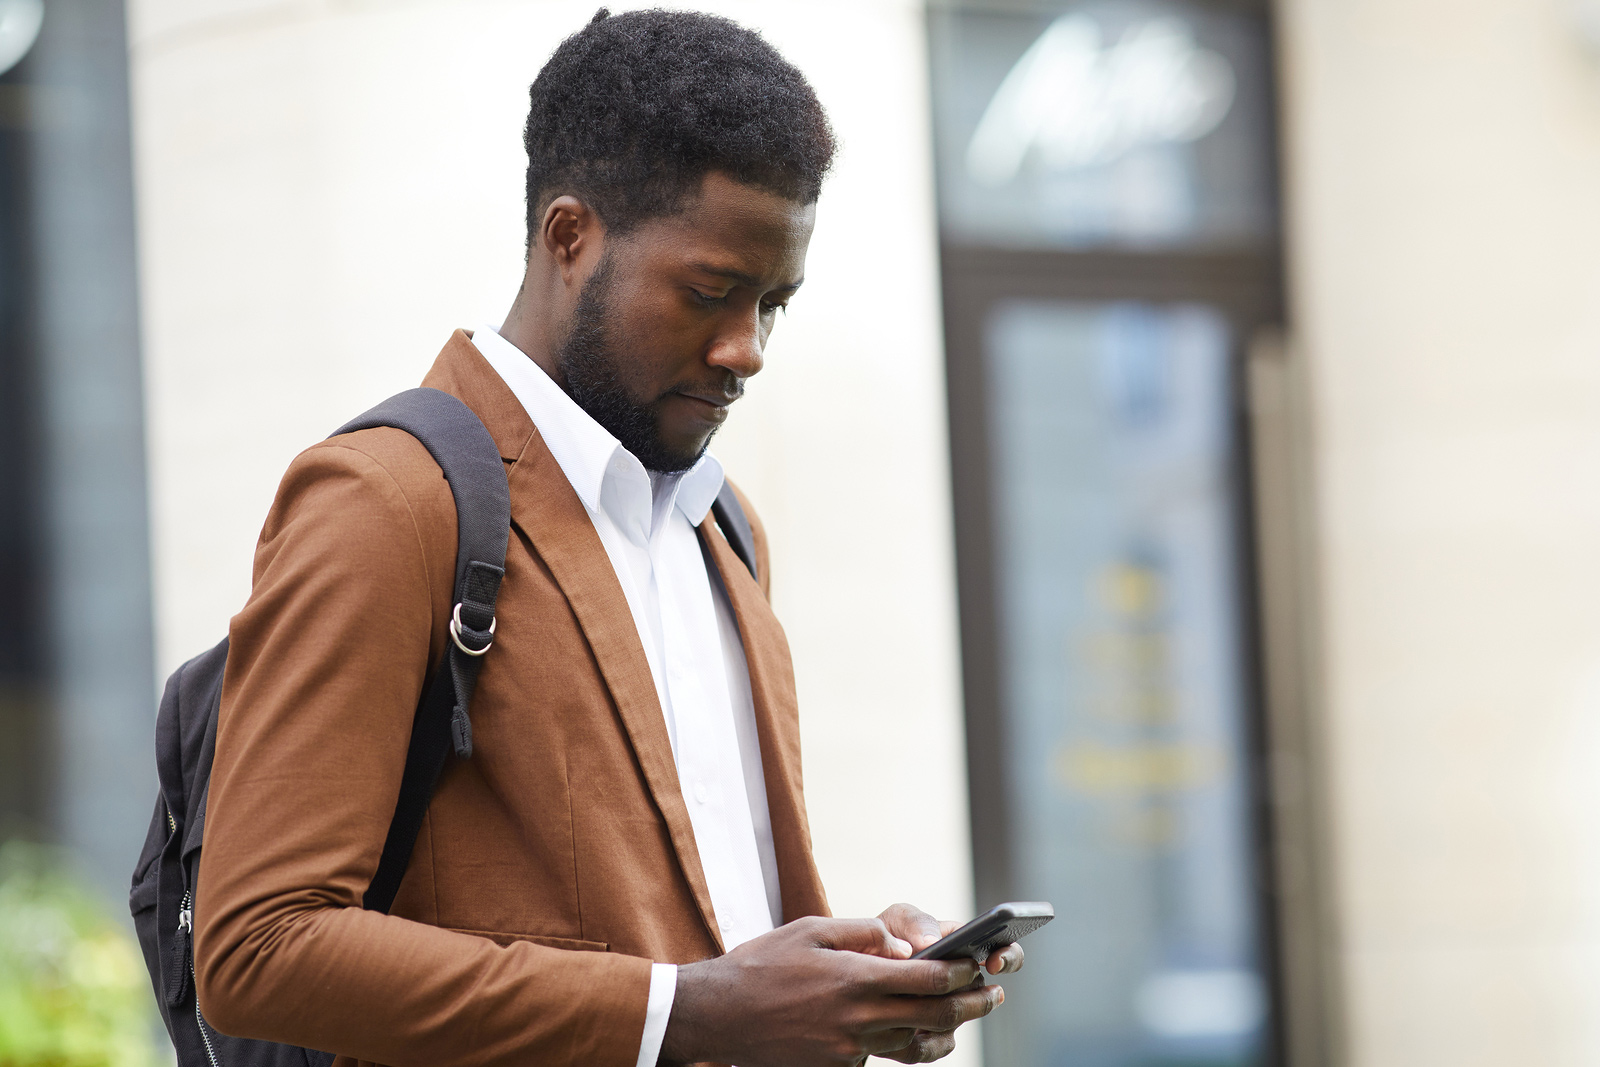 African American man in suit looking at his smart phone in Baltimore | Therapy for Anxiety | Anxiety Treatment | New Connections Counseling Center | men's therapy in Baltimore, MD 21210" width="300" height="200"